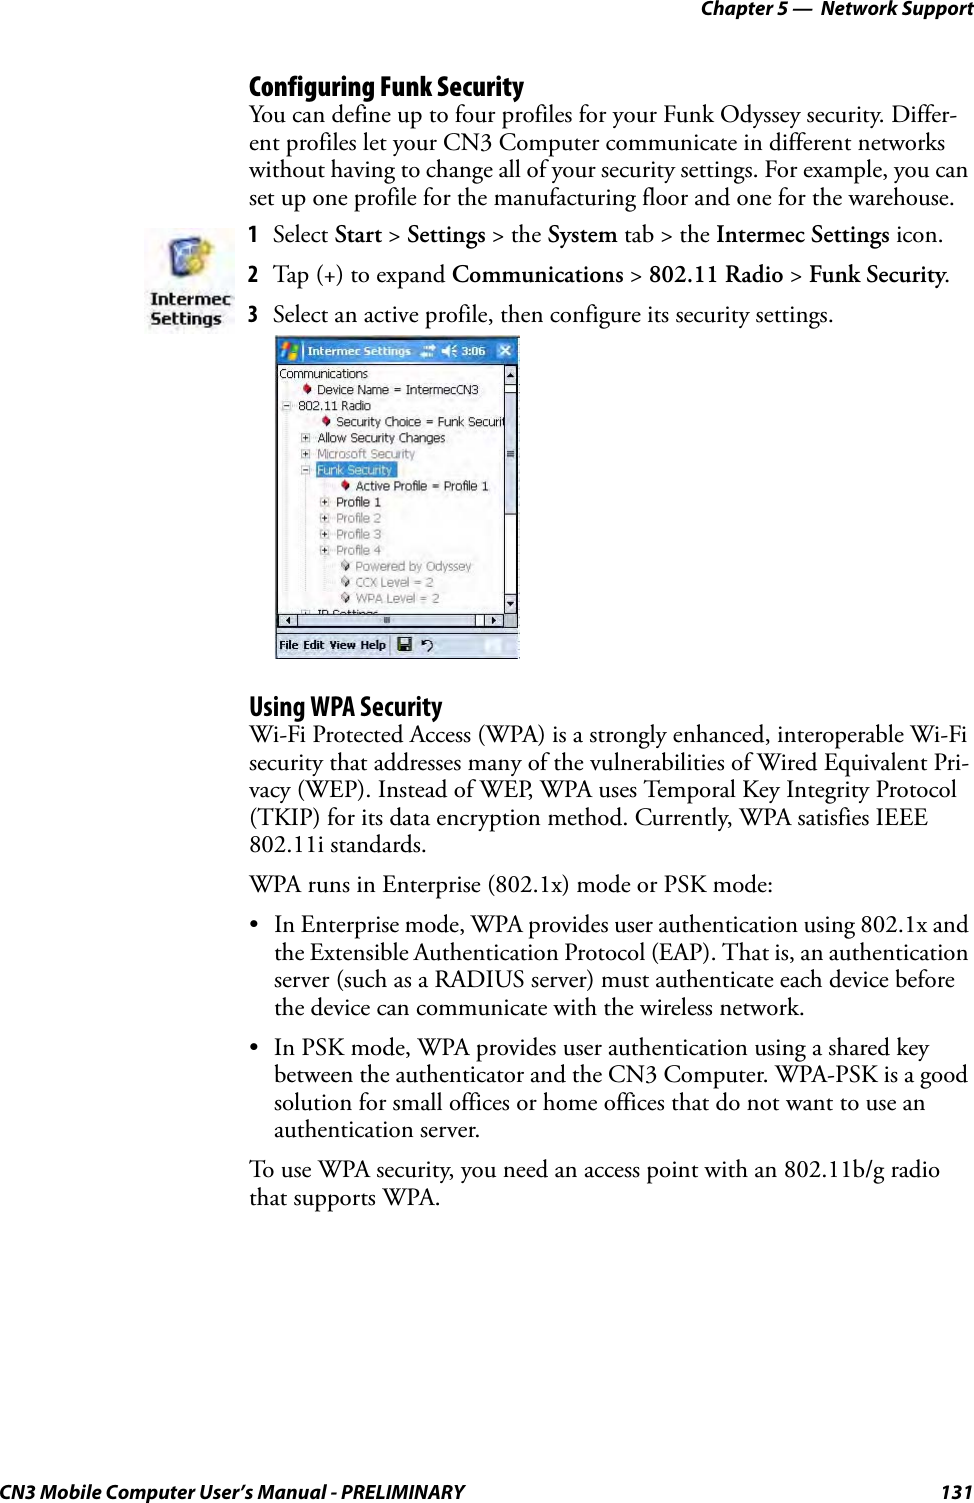 Chapter 5 —  Network SupportCN3 Mobile Computer User’s Manual - PRELIMINARY 131Configuring Funk SecurityYou can define up to four profiles for your Funk Odyssey security. Differ-ent profiles let your CN3 Computer communicate in different networks without having to change all of your security settings. For example, you can set up one profile for the manufacturing floor and one for the warehouse.Using WPA SecurityWi-Fi Protected Access (WPA) is a strongly enhanced, interoperable Wi-Fi security that addresses many of the vulnerabilities of Wired Equivalent Pri-vacy (WEP). Instead of WEP, WPA uses Temporal Key Integrity Protocol (TKIP) for its data encryption method. Currently, WPA satisfies IEEE 802.11i standards.WPA runs in Enterprise (802.1x) mode or PSK mode:• In Enterprise mode, WPA provides user authentication using 802.1x and the Extensible Authentication Protocol (EAP). That is, an authentication server (such as a RADIUS server) must authenticate each device before the device can communicate with the wireless network.• In PSK mode, WPA provides user authentication using a shared key between the authenticator and the CN3 Computer. WPA-PSK is a good solution for small offices or home offices that do not want to use an authentication server.To use WPA security, you need an access point with an 802.11b/g radio that supports WPA.1Select Start &gt; Settings &gt; the System tab &gt; the Intermec Settings icon.2Tap (+) to expand Communications &gt; 802.11 Radio &gt; Funk Security.3Select an active profile, then configure its security settings.